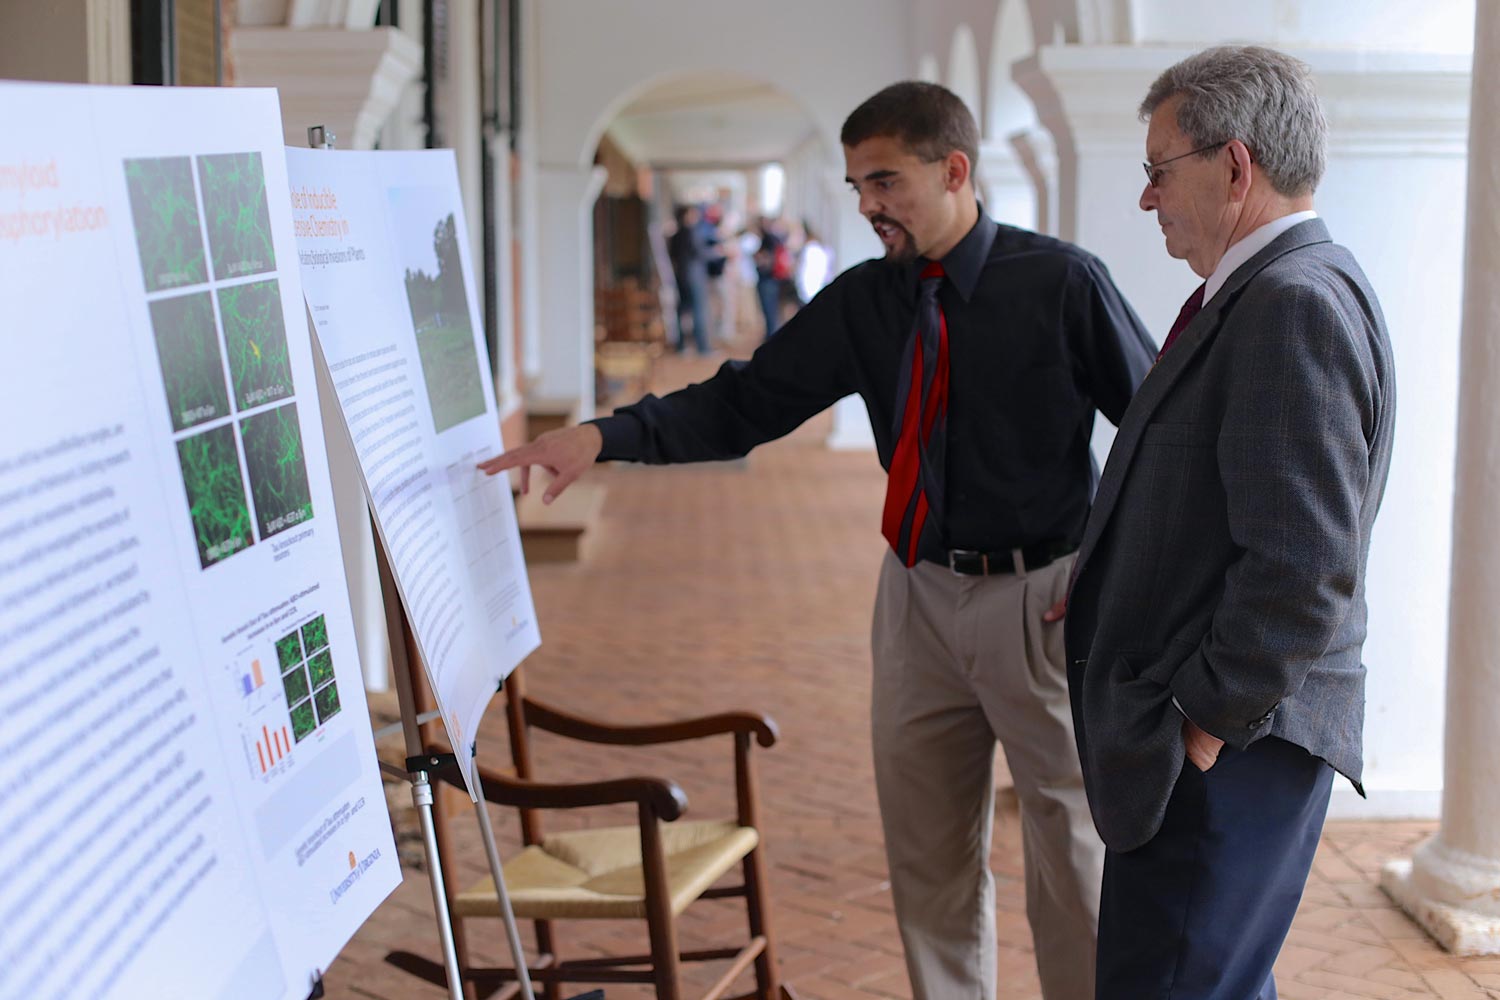 Phil Parrish, right, examining a research poster on display on the Lawn.